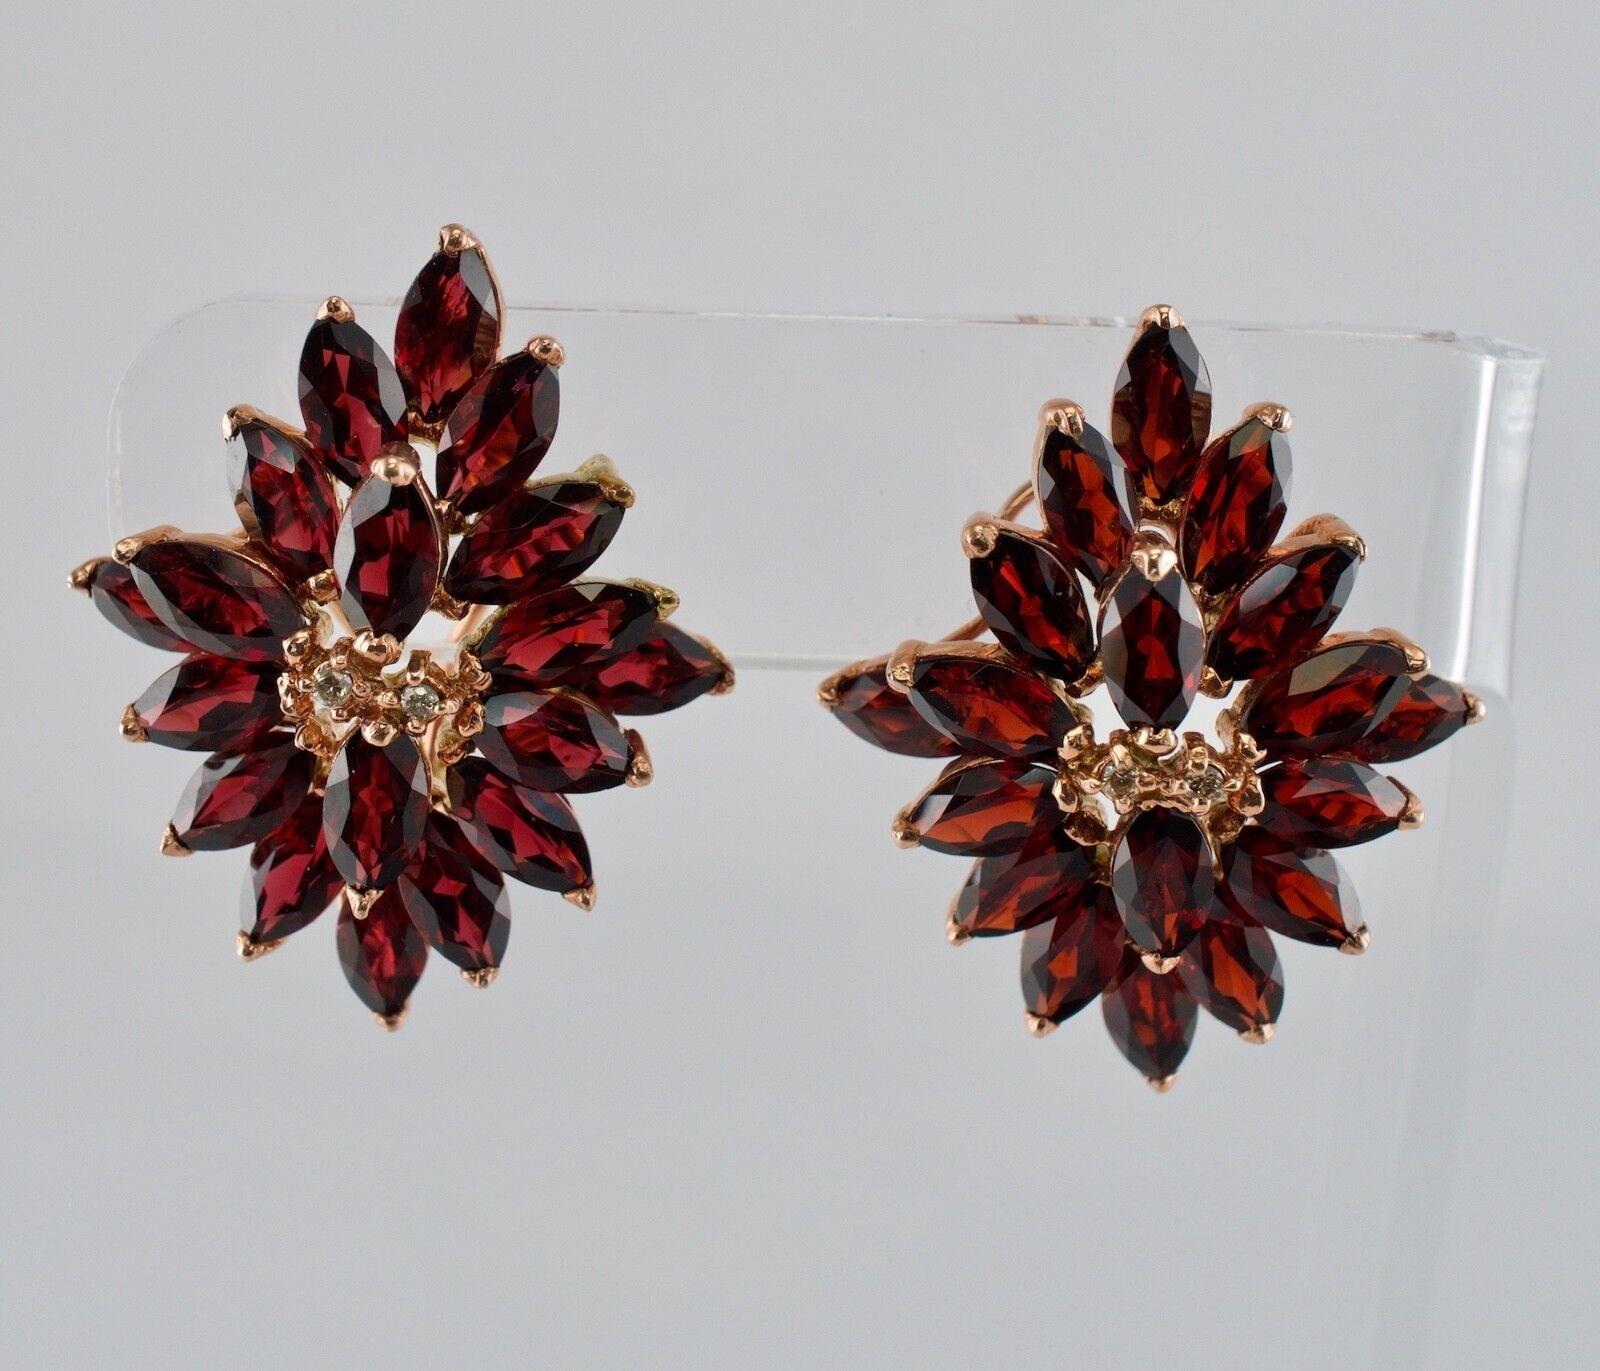 This beautiful pair of earrings vintage is finely crafted in solid 14K Rose Gold and set with cleanest genuine Earth mined Garnets and Diamonds. Each earring holds nineteen marquise cut Garnets measuring 7mm x 3.5mm for the grand total 15.96 carats